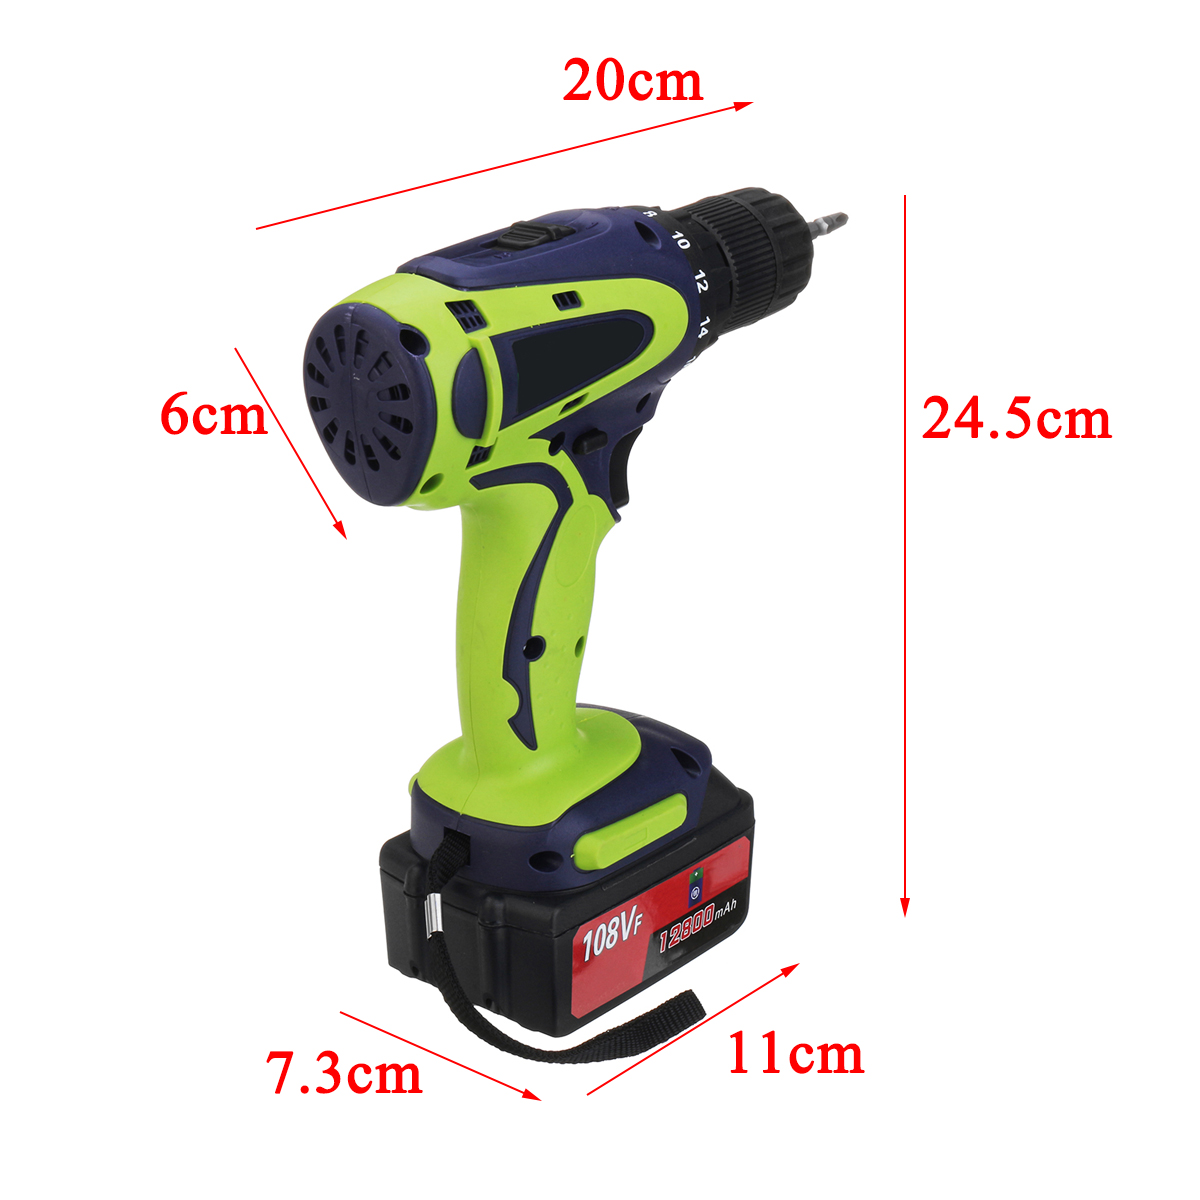 108VF-12800mAh-Dual-Speed-Cordless-Drill-Multifunctional-High-Power-Household-Electric-Drills-W-Acce-1457224-10